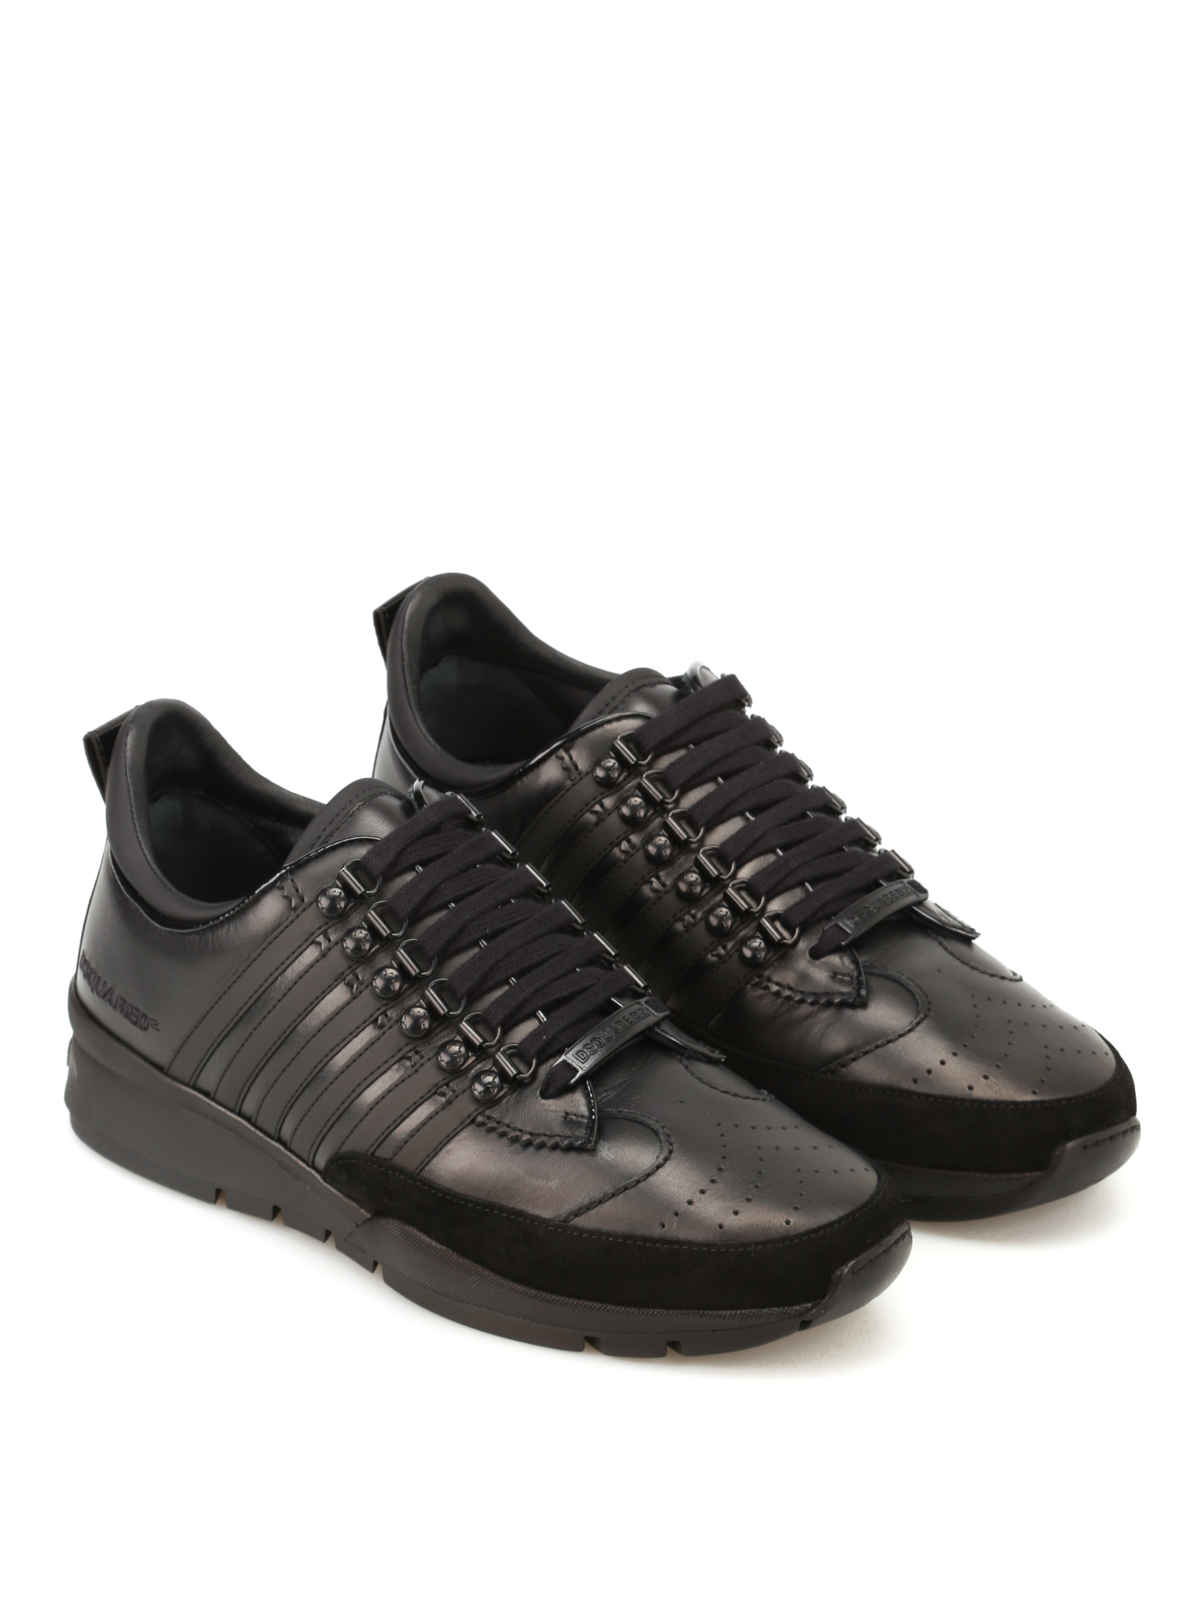 Dsquared2 - 251 black leather sneakers 